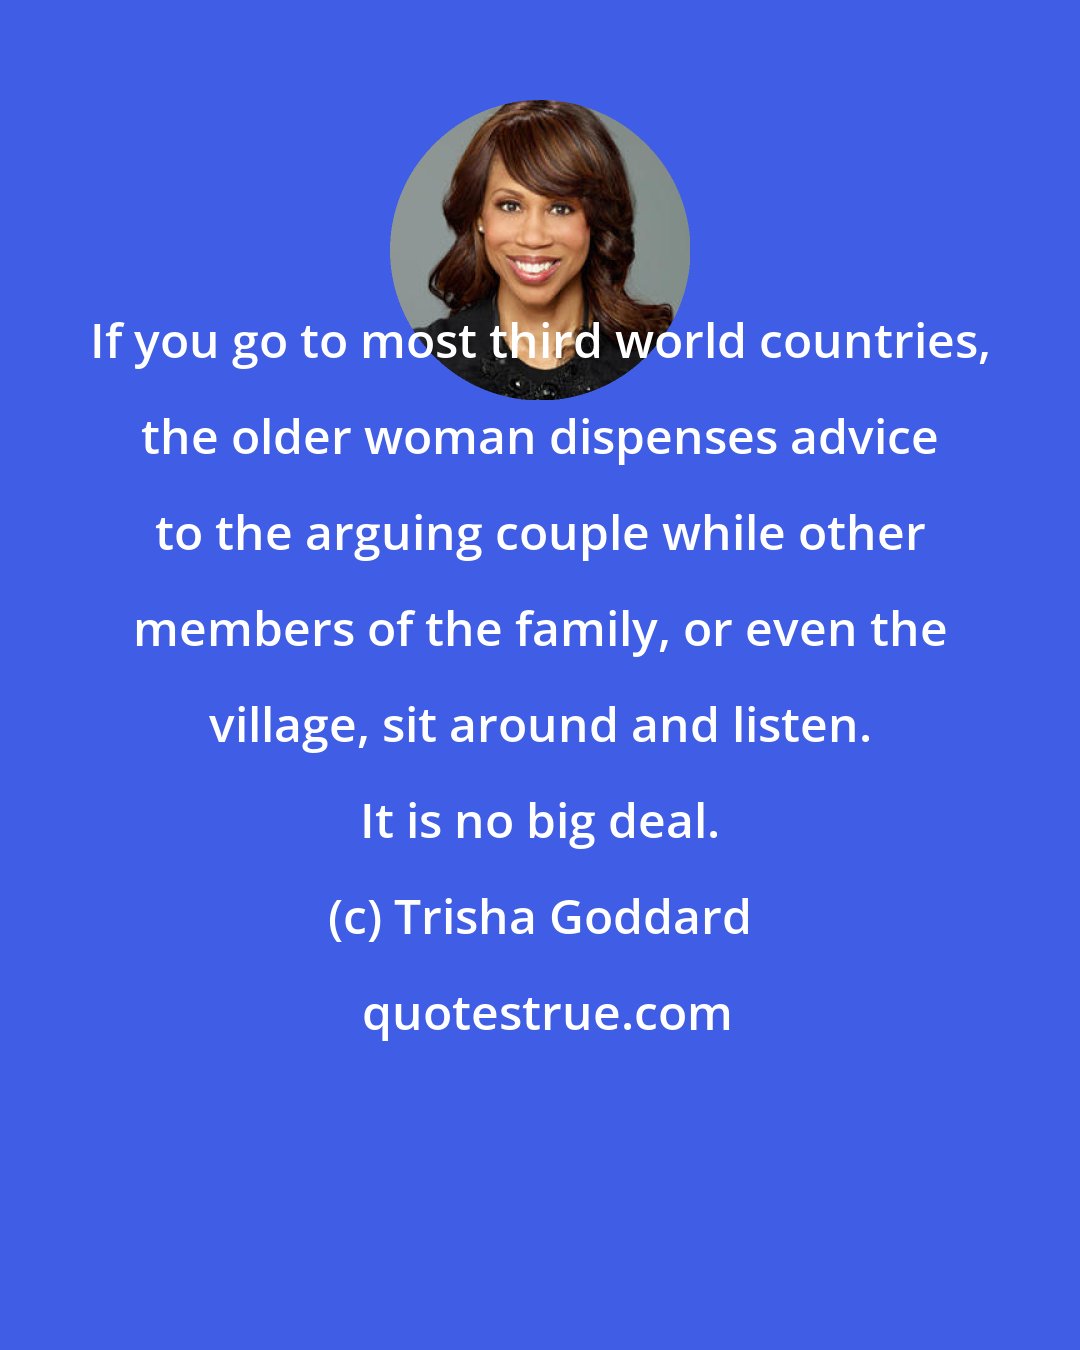 Trisha Goddard: If you go to most third world countries, the older woman dispenses advice to the arguing couple while other members of the family, or even the village, sit around and listen. It is no big deal.